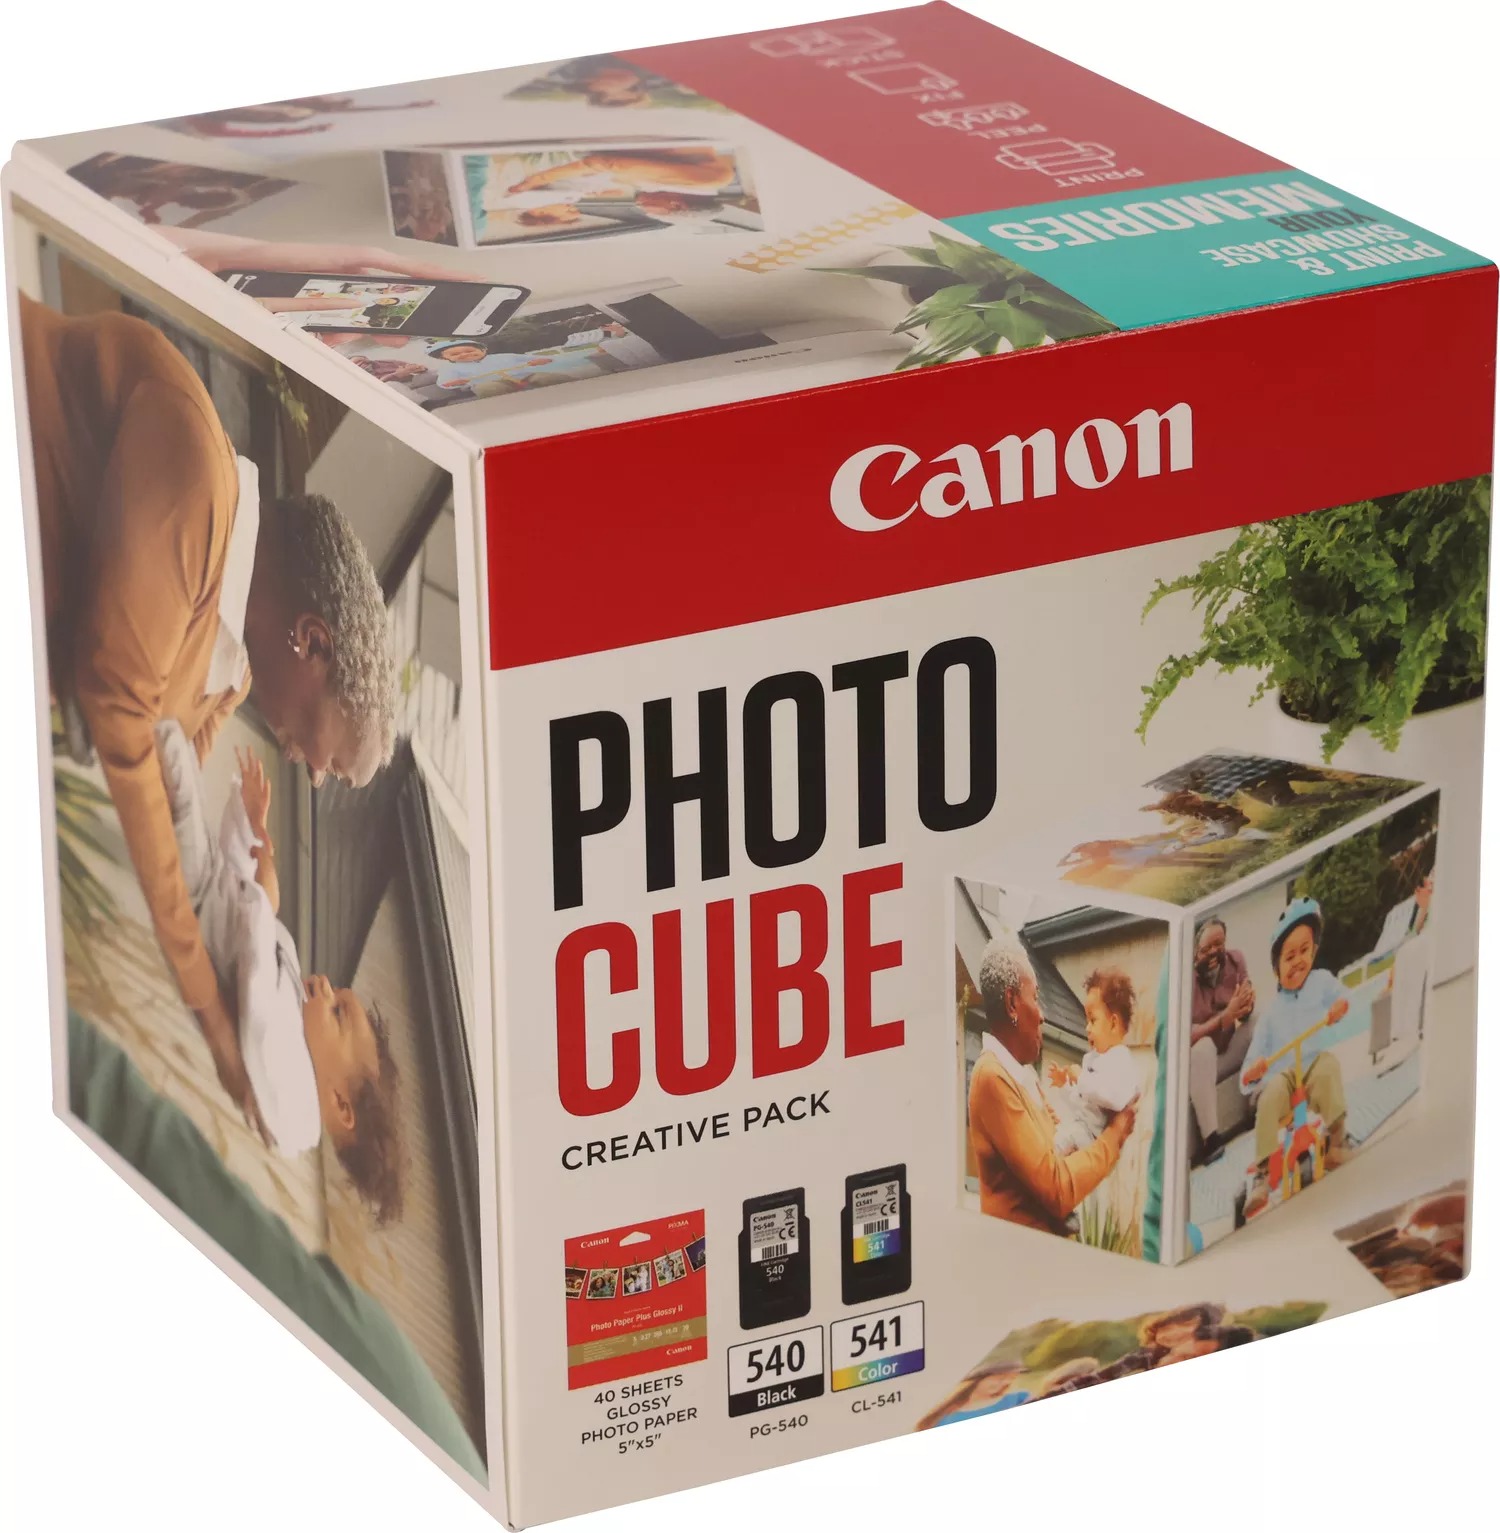 Original Canon PG-540 / CL-541 Photo Cube Ink Cartridges & Glossy Photo Paper Pack Blue (5225B017)